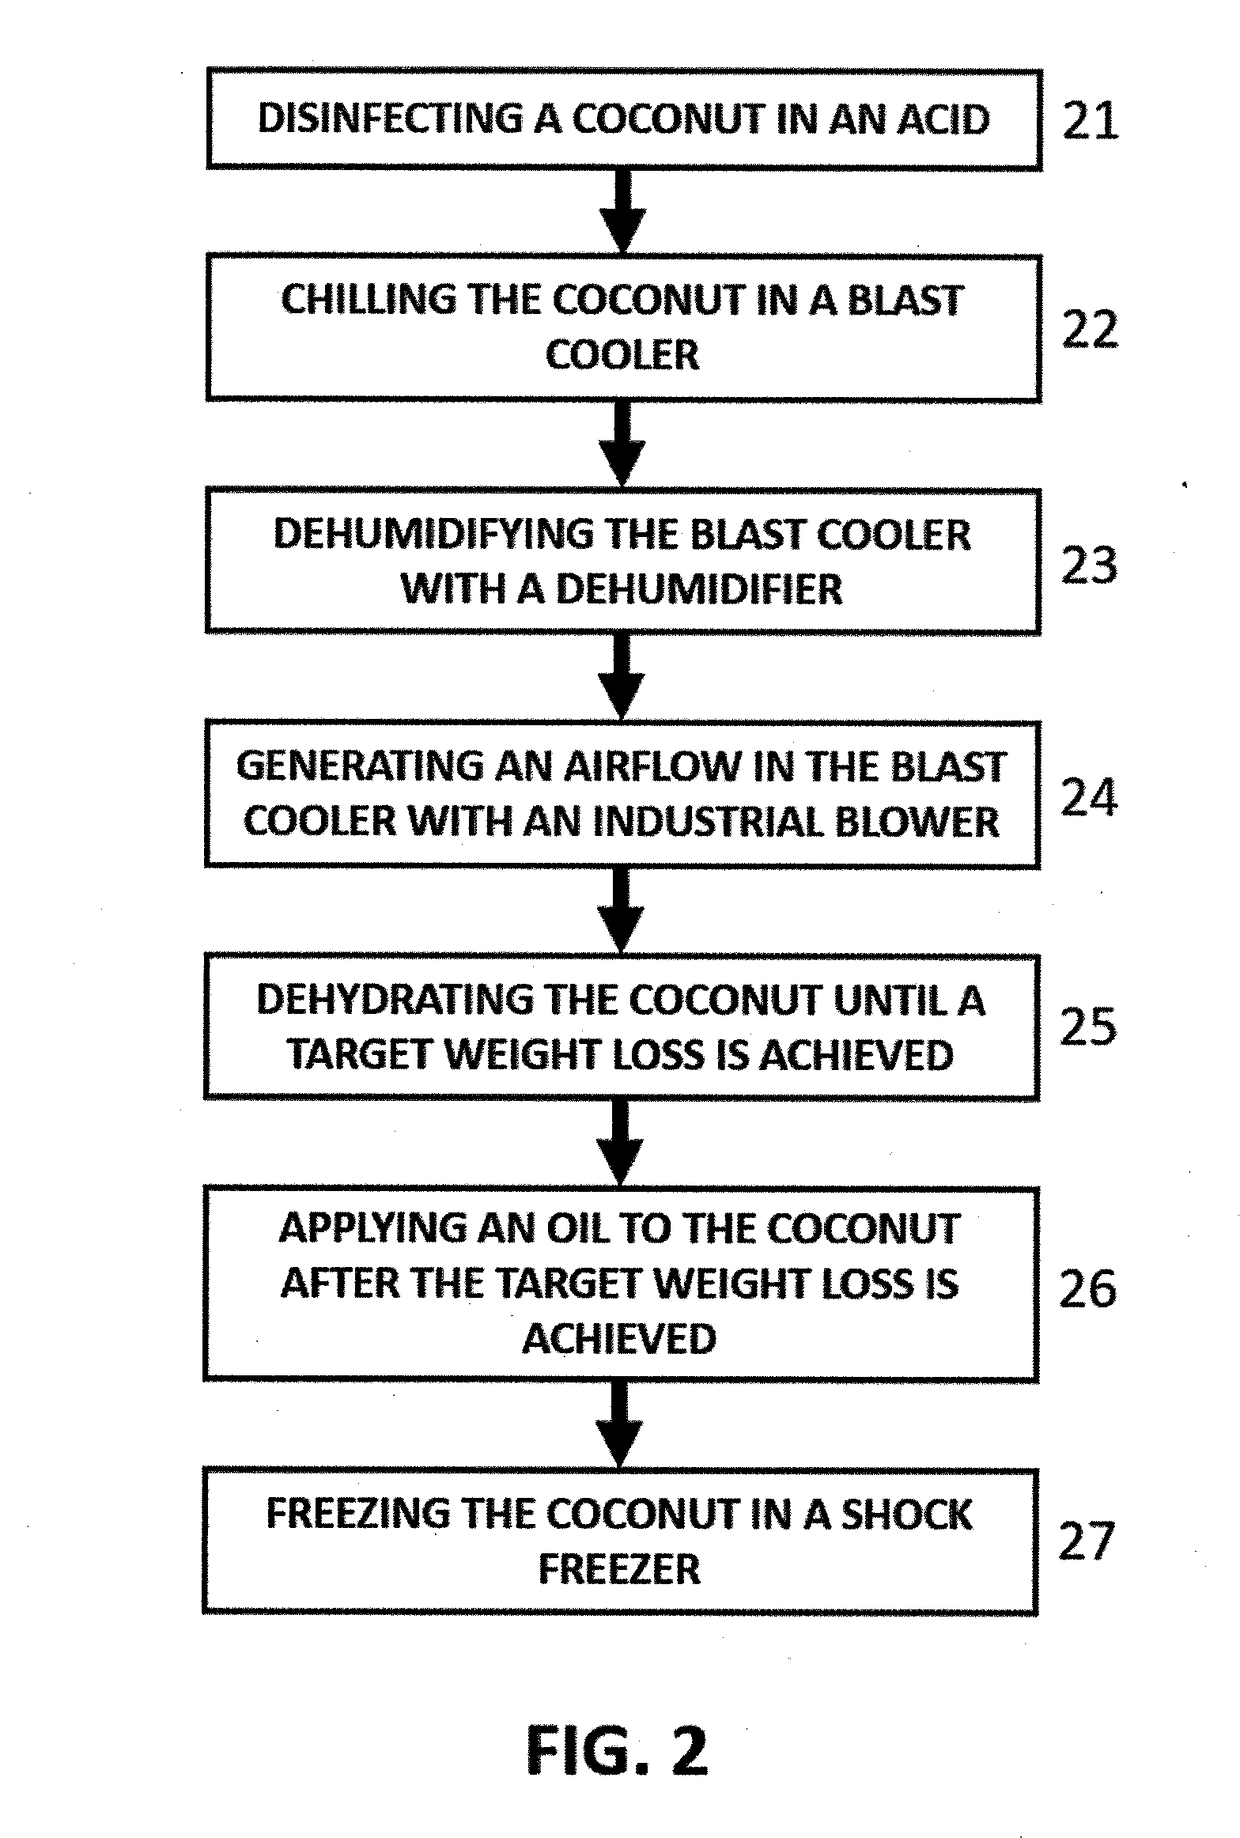 System and method for the preservation of coconut products